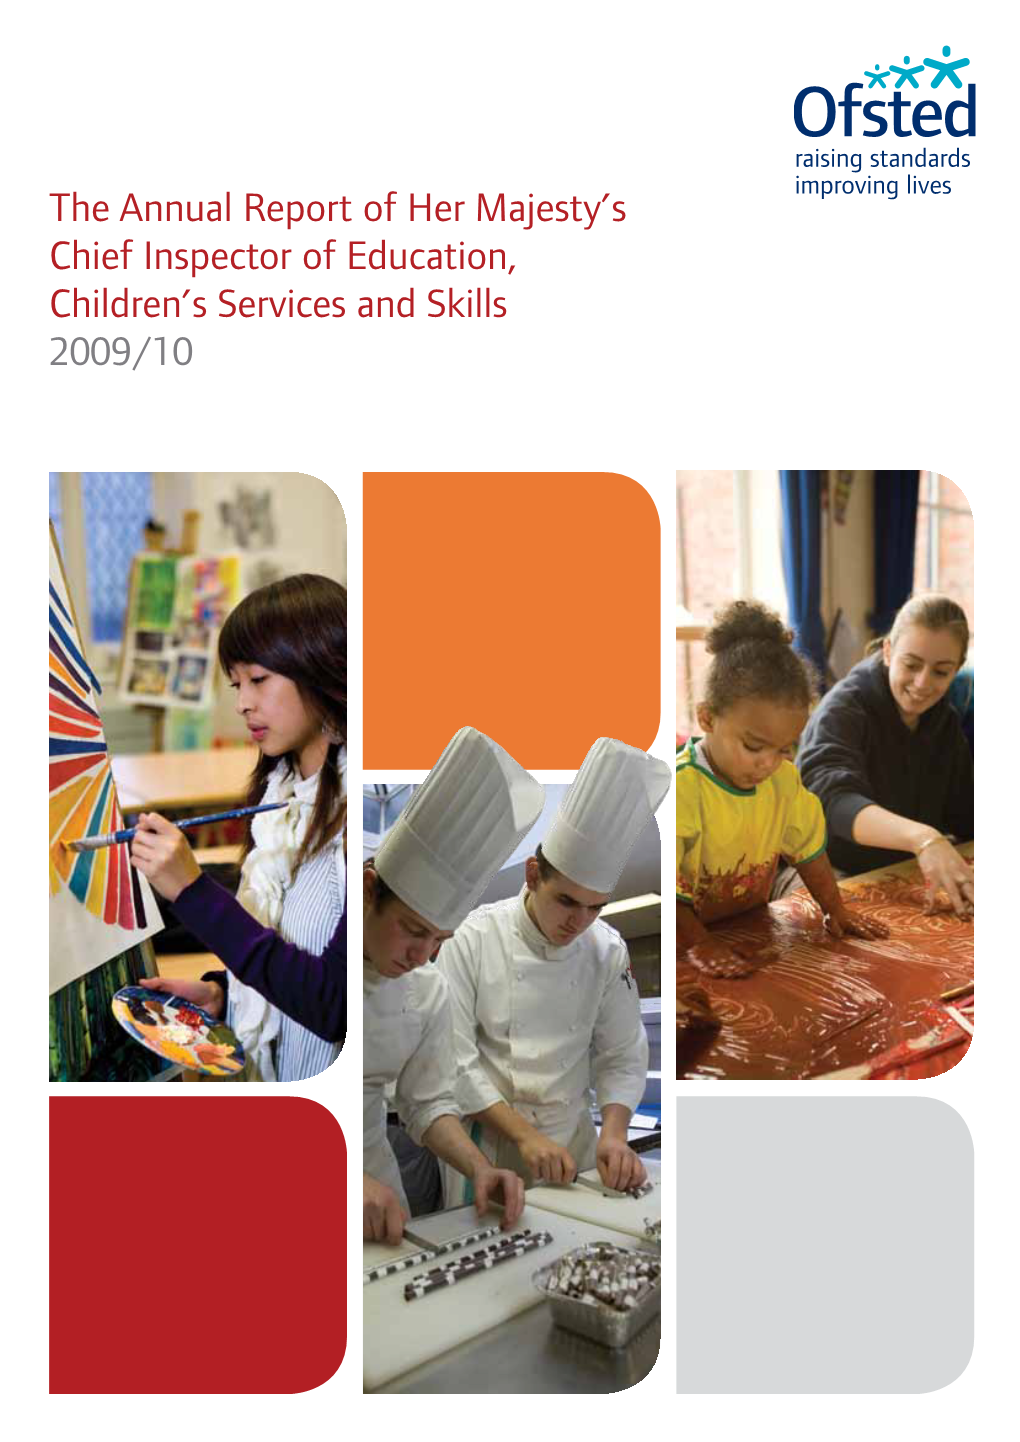 The Annual Report of Her Majesty's Chief Inspector of Education